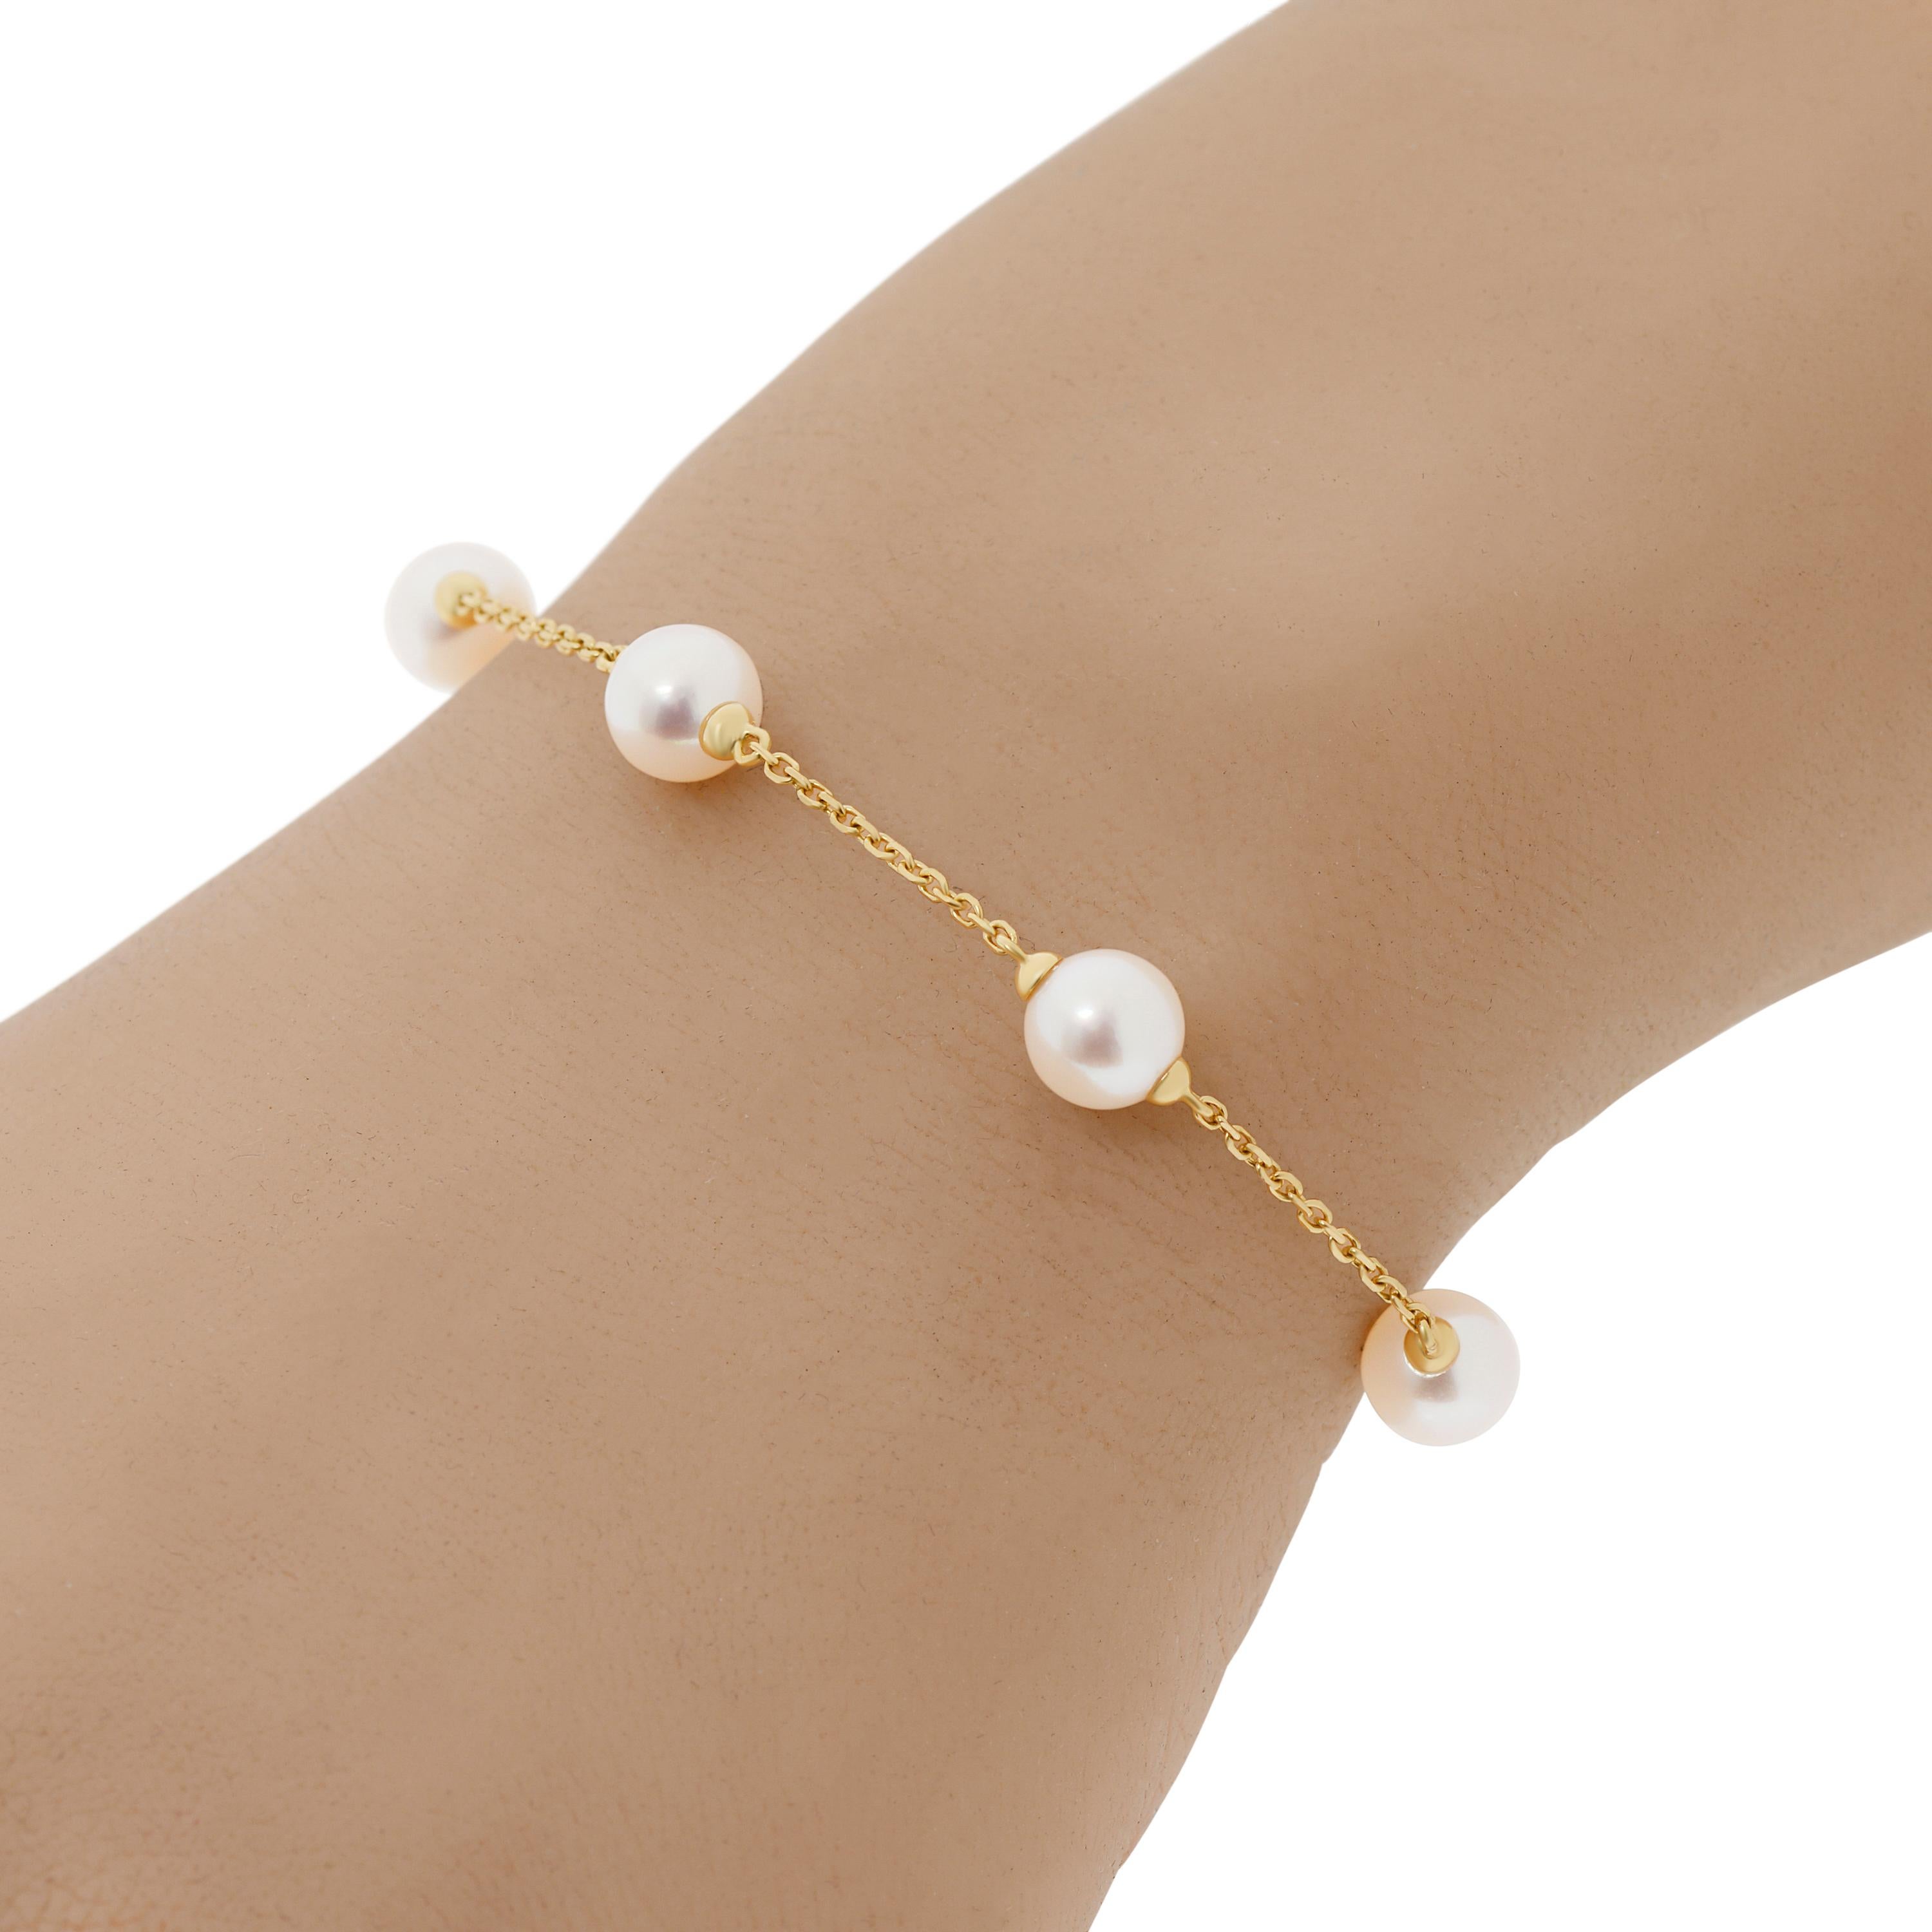 Assael 18K yellow gold chain bracelet features 5 japanese akoya cultured pearls 7.0-7.5mm set in 18K yellow gold. The length is 6 3/4